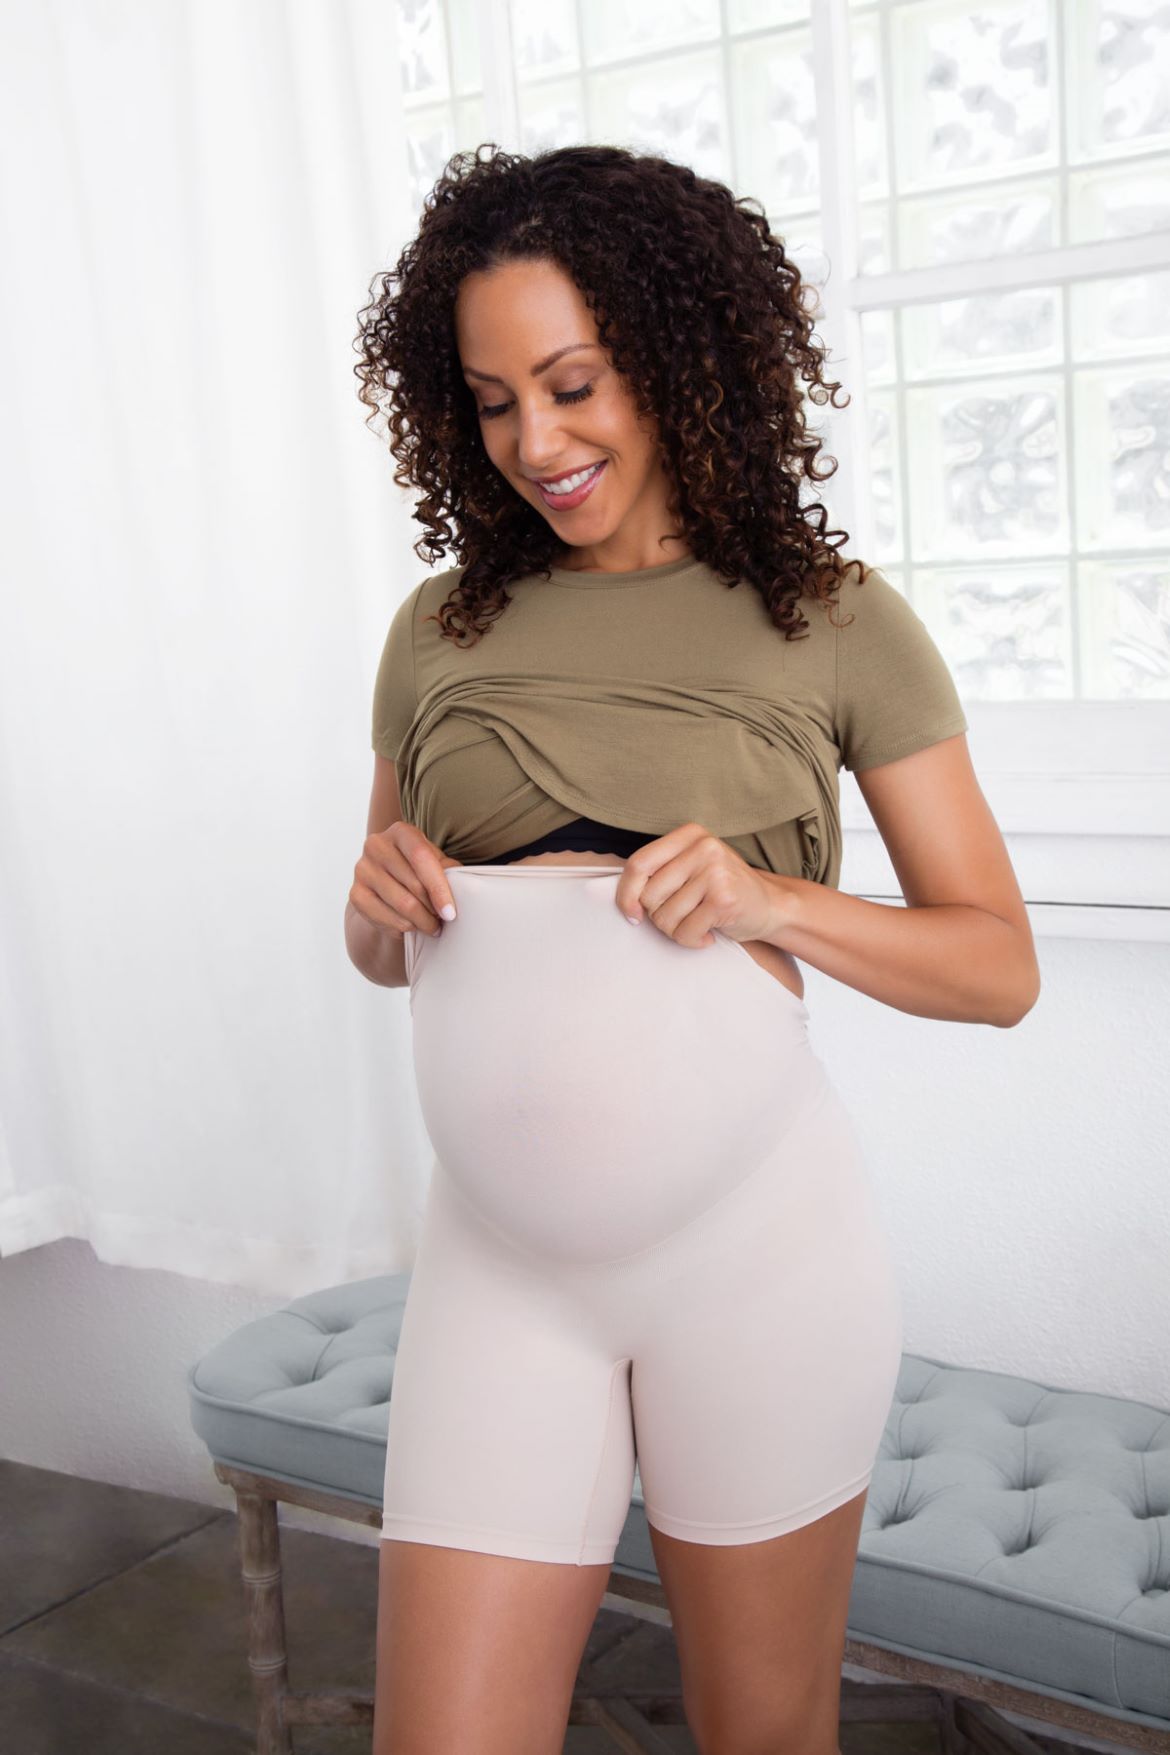 Belly Bandit: Maternity and post-pregnancy support wear - Page 2 of 2 - The  Natural Parent Magazine